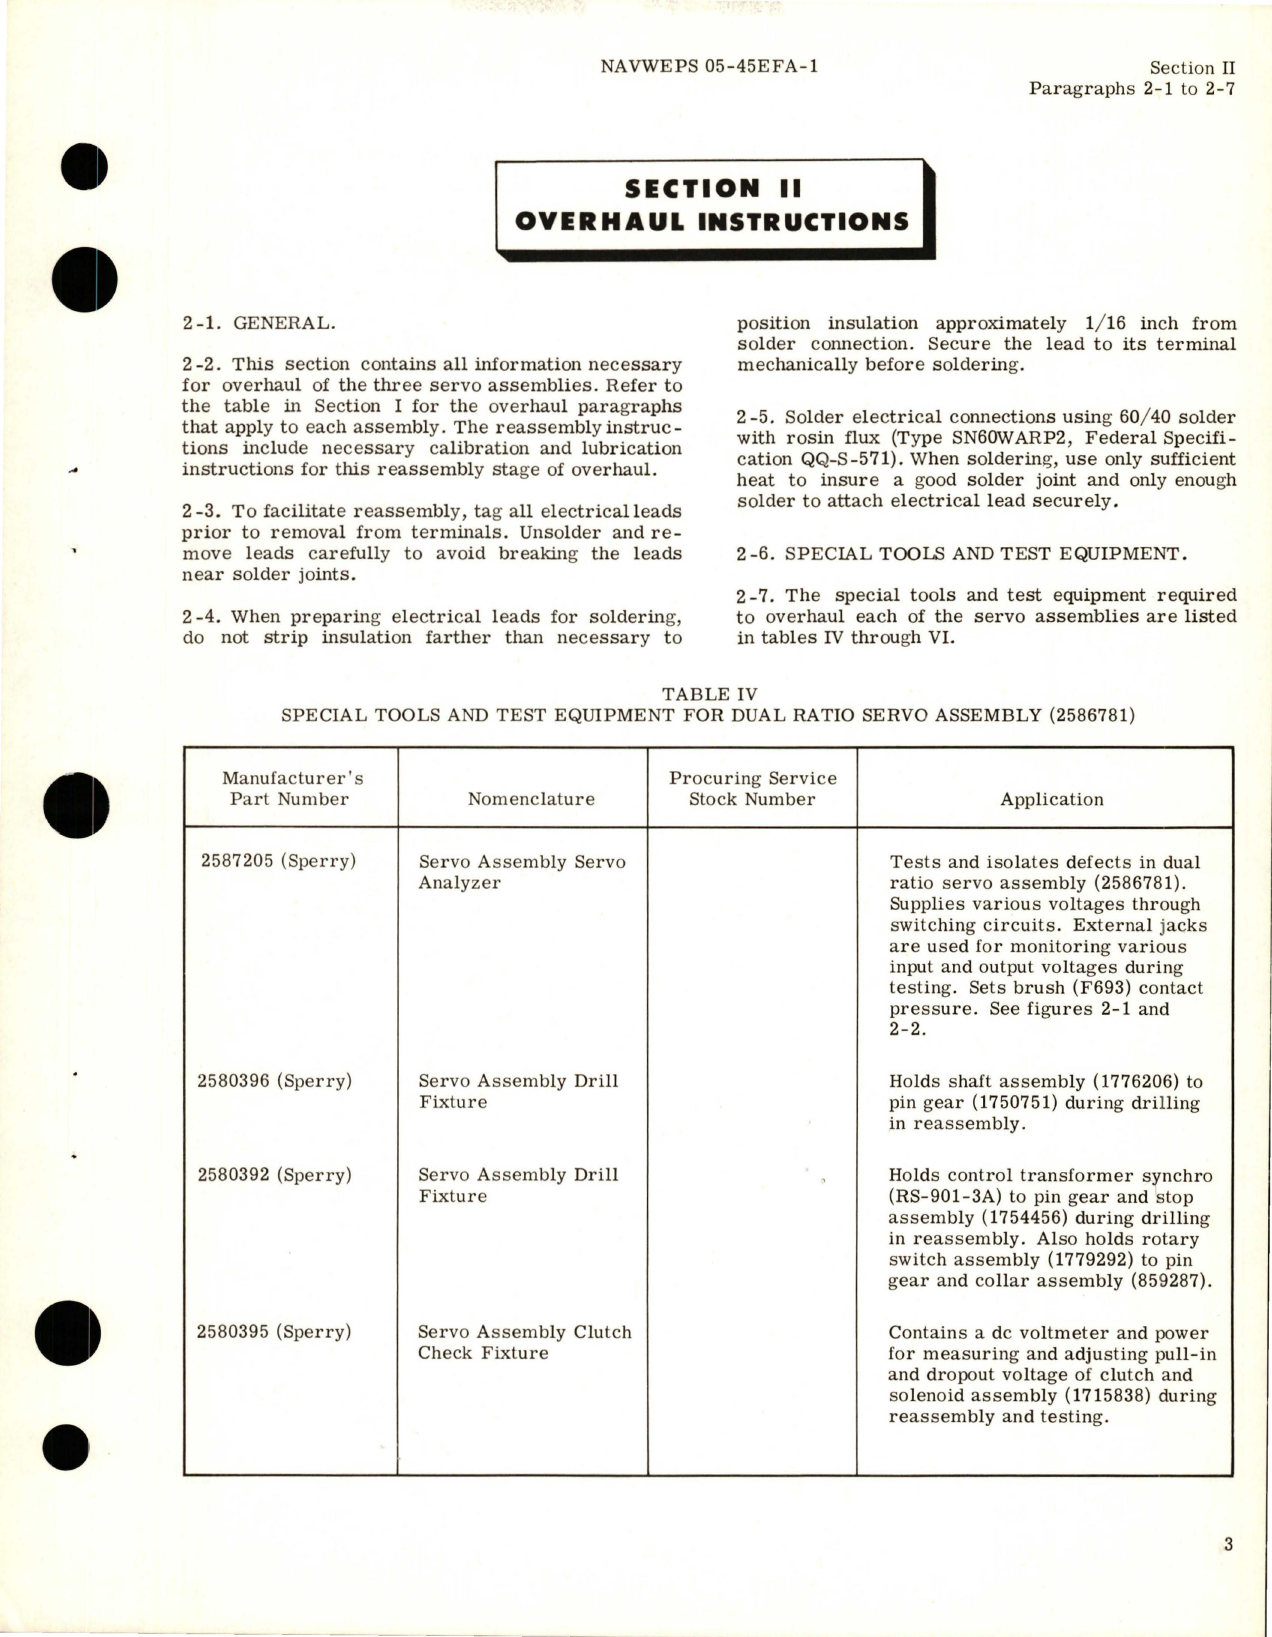 Sample page 9 from AirCorps Library document: Overhaul Instructions for Dual Ratio Servo Assembly Z4020, Servo Assembly Z3030 and Servo Assembly Z8030